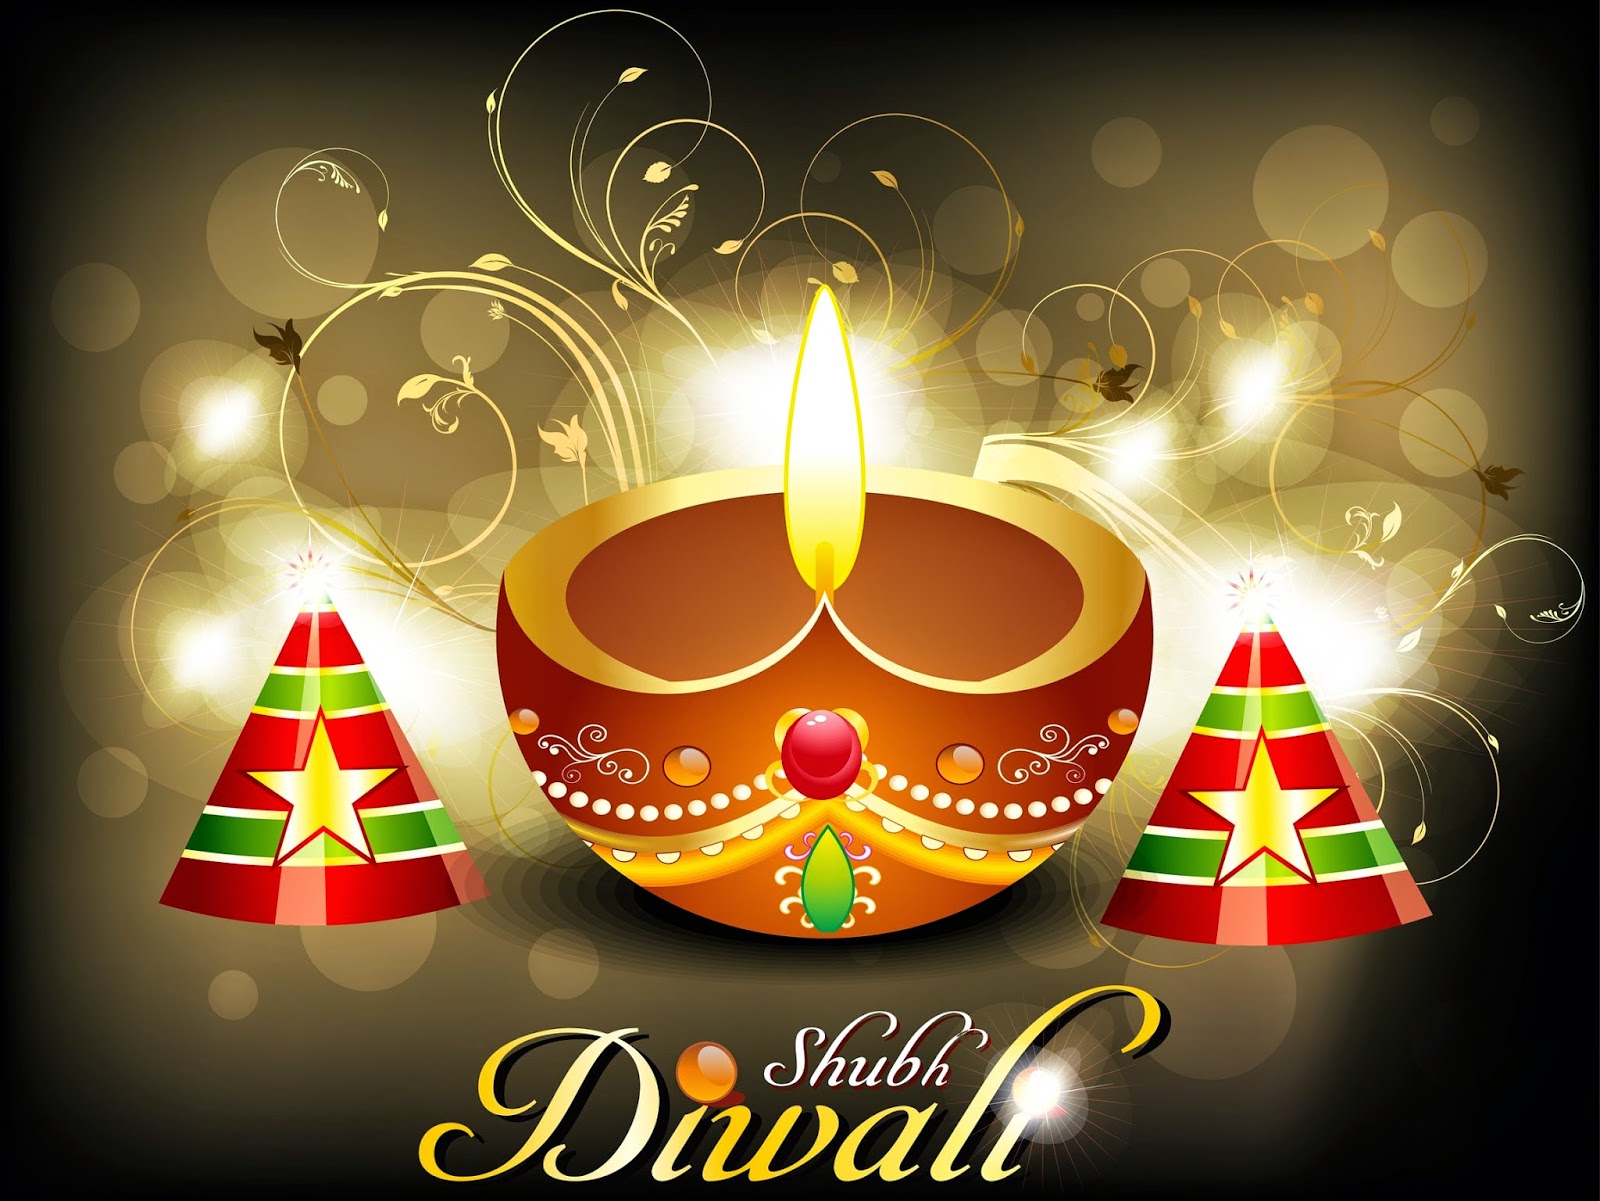 Diwali Photos, Diwali Pictures & Diwali Images (Free Photos To Download) –  The Popular Festivals